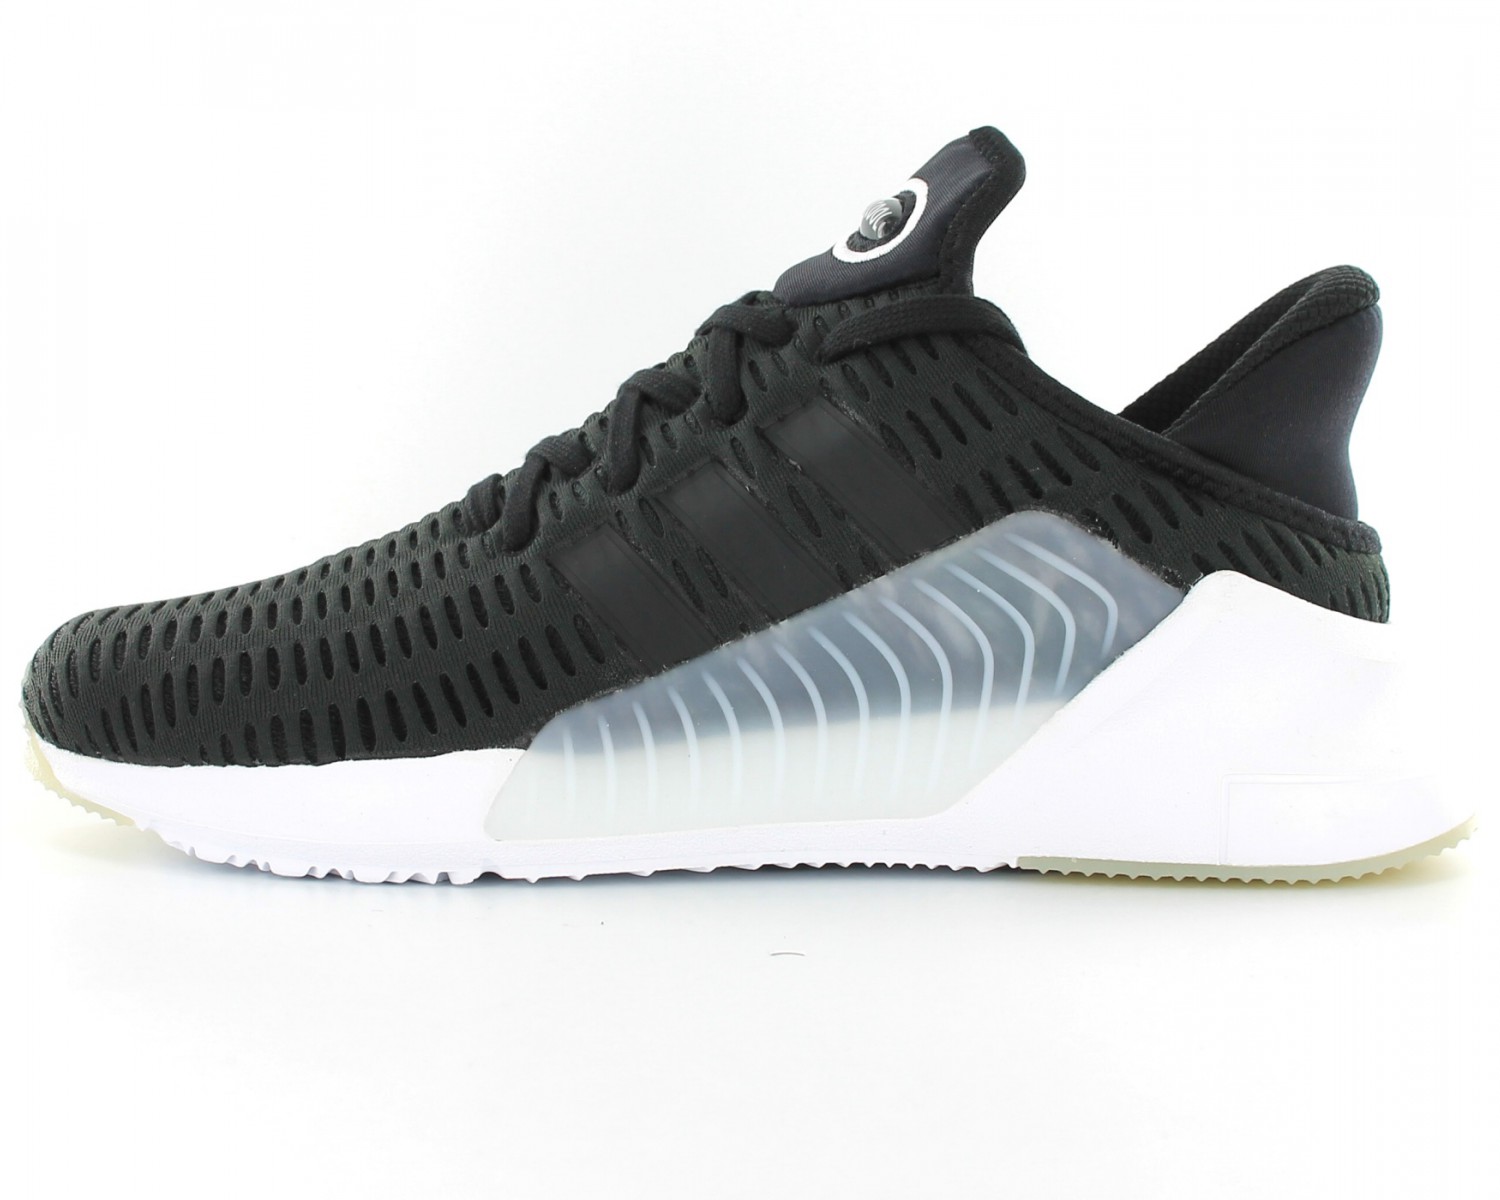 adidas climacool homme blanche